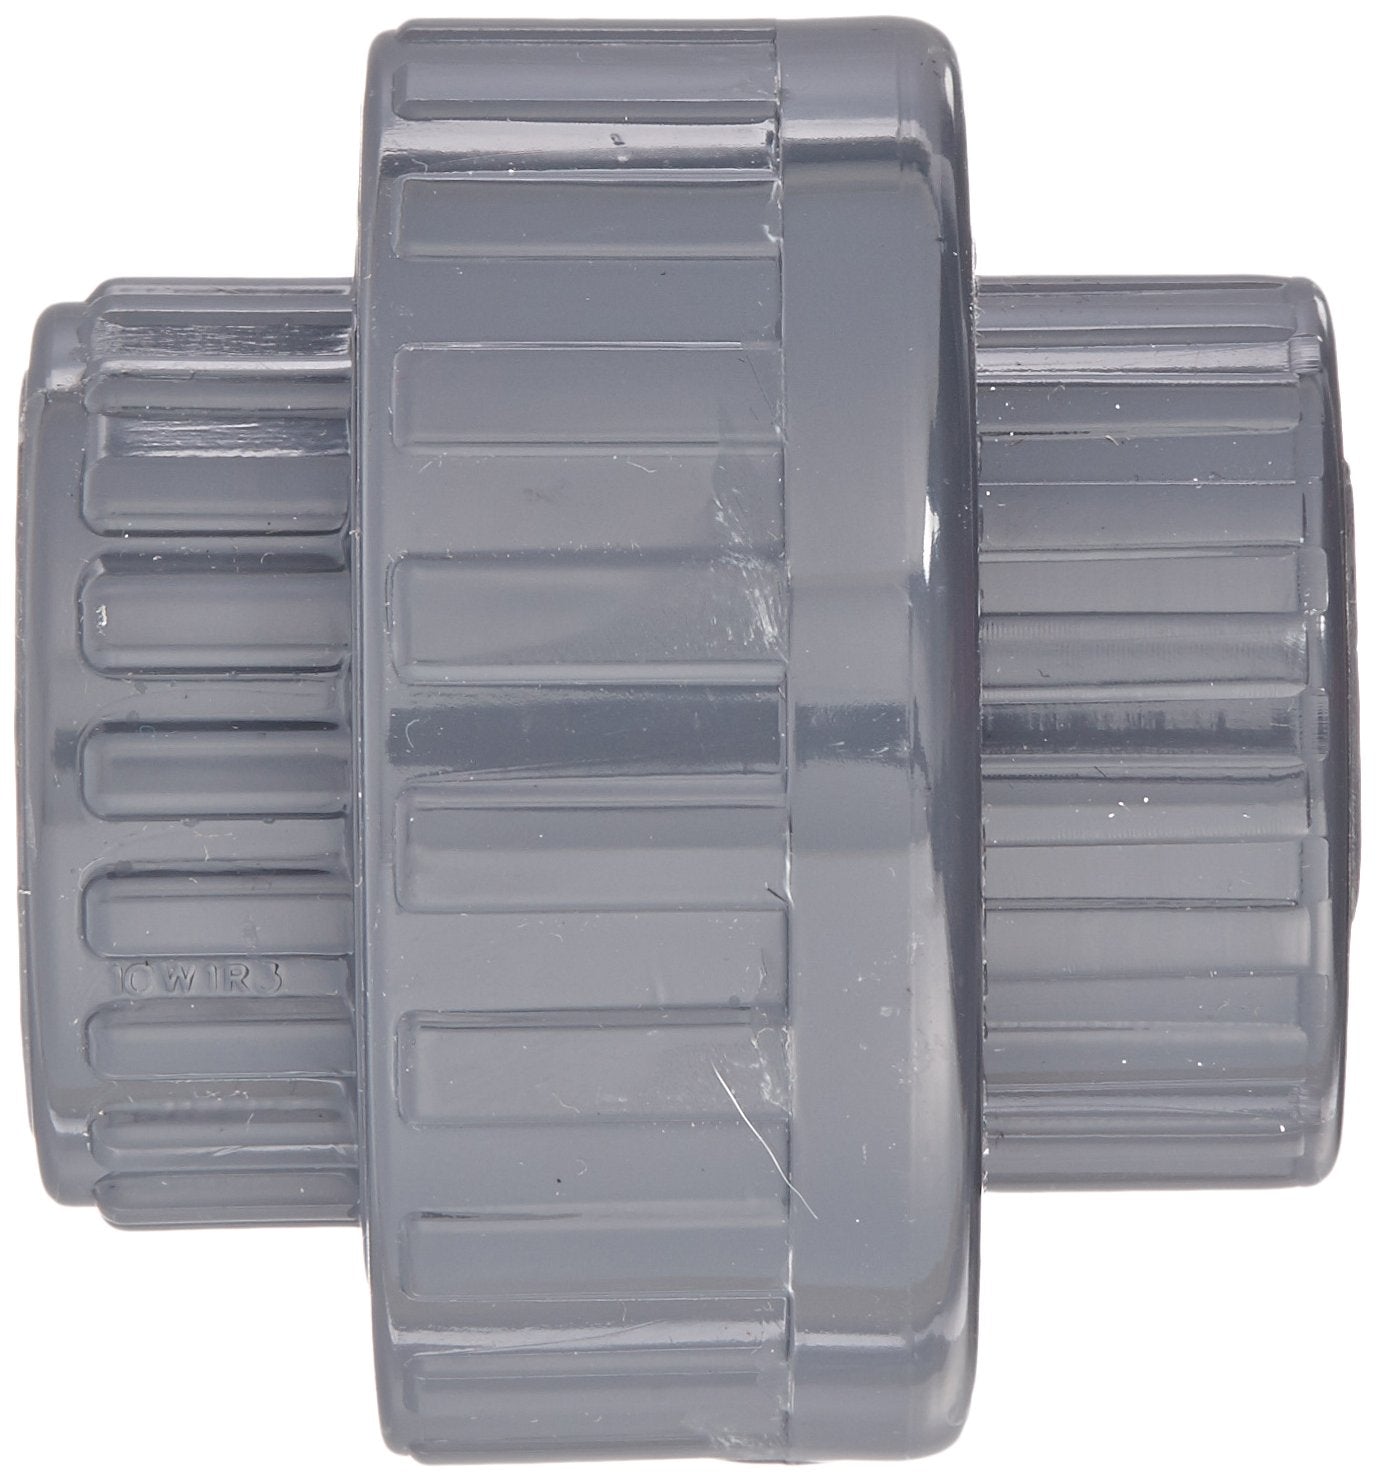 858-010 - PVC Pipe Fitting, Union with Viton O-Ring, Schedule 80, 1" NPT Female